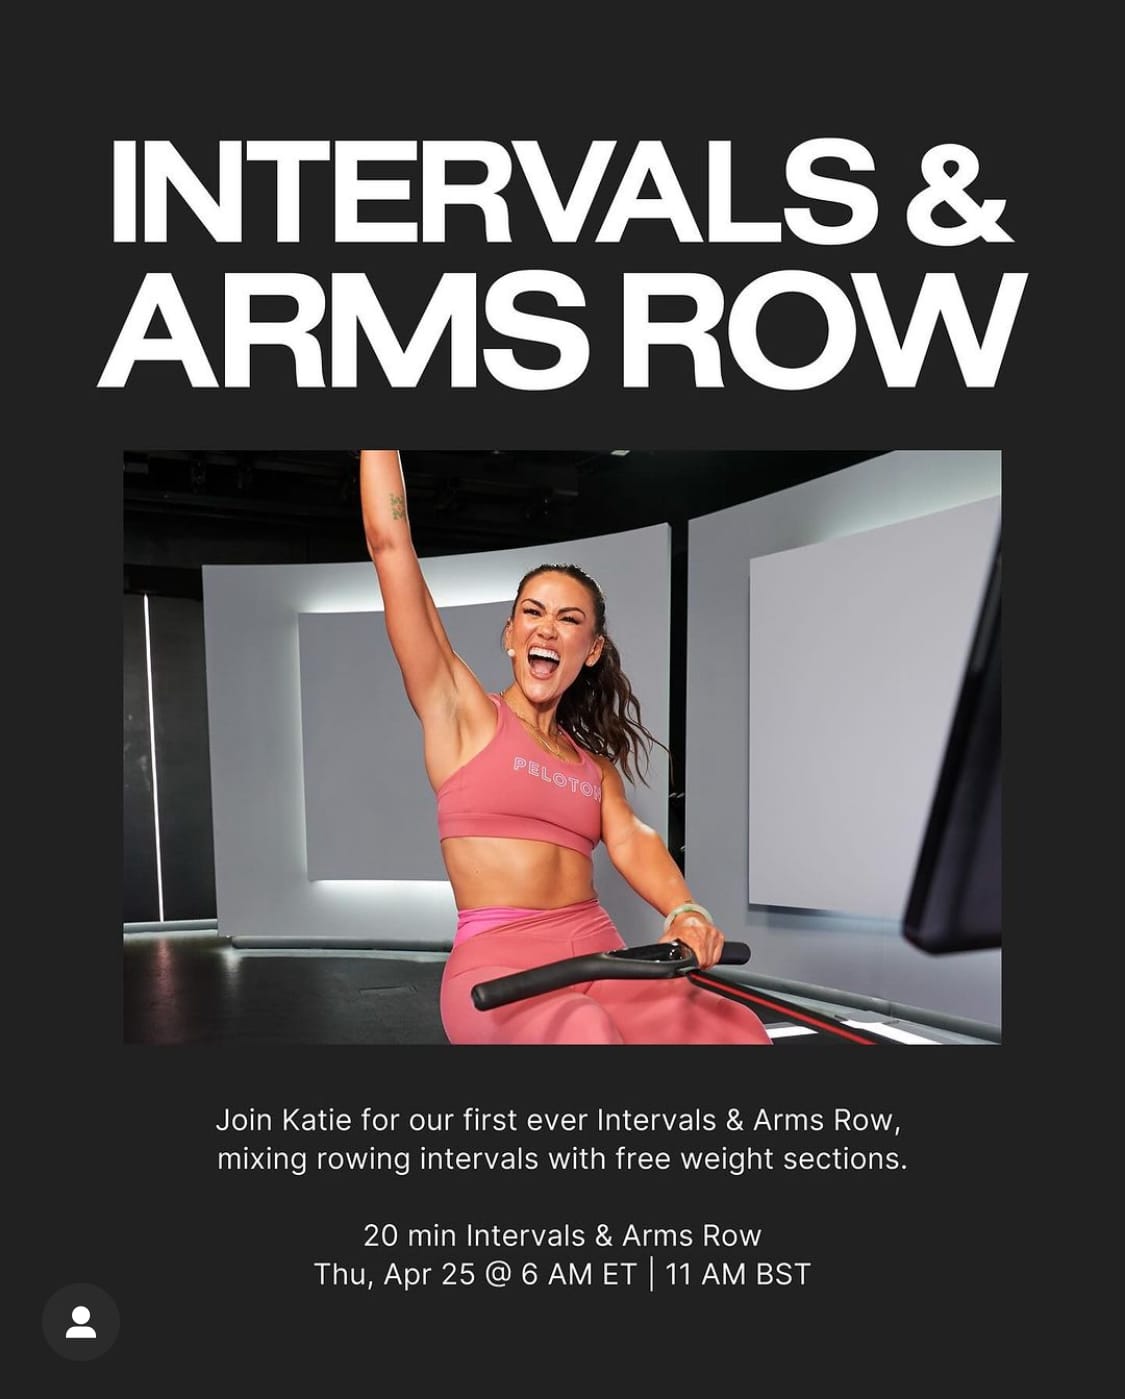 Peloton’s “This Week at Peloton” Instagram post highlighting 20 minute Intervals & Arms row with Katie Wang. Image credit Peloton social media.